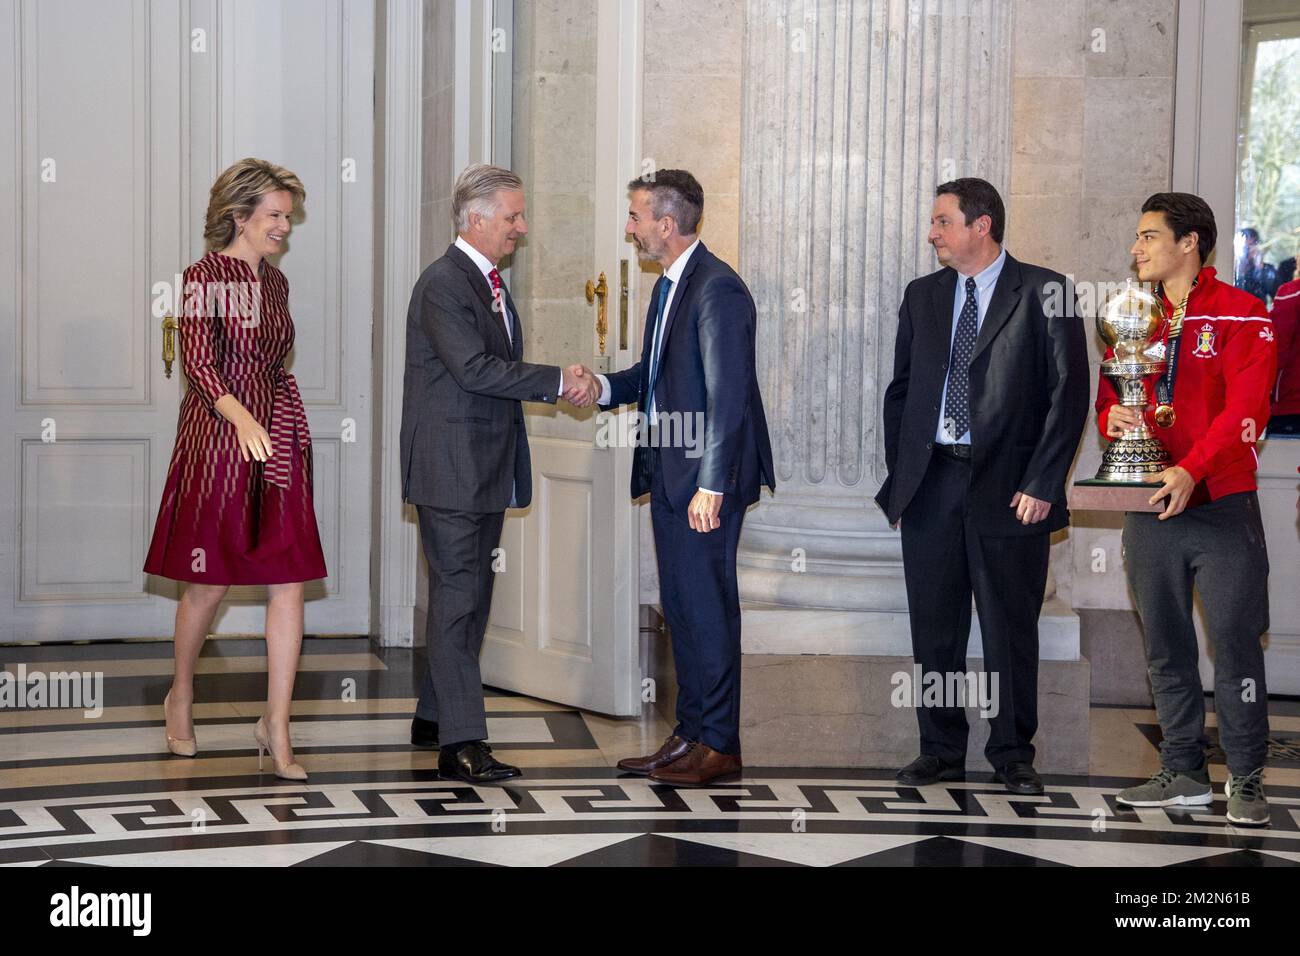 Queen Mathilde of Belgium, King Philippe - Filip of Belgium, Belgian Hockey Federation chairman Marc Coudron, Belgian Hockey Federation Secretary-General Serge Pilet and Belgium's captain Thomas Briels, holding the World Cup trophy, pictured during a reception to honour the new hockey world champions, the Belgian Red Lions team, in the Royal castle in Laken - Laeken, Tuesday 18 December 2018. Red Lions won 3-2 the final against The Netherlands in India last last Sunday. BELGA PHOTO HATIM KAGHAT Stock Photo